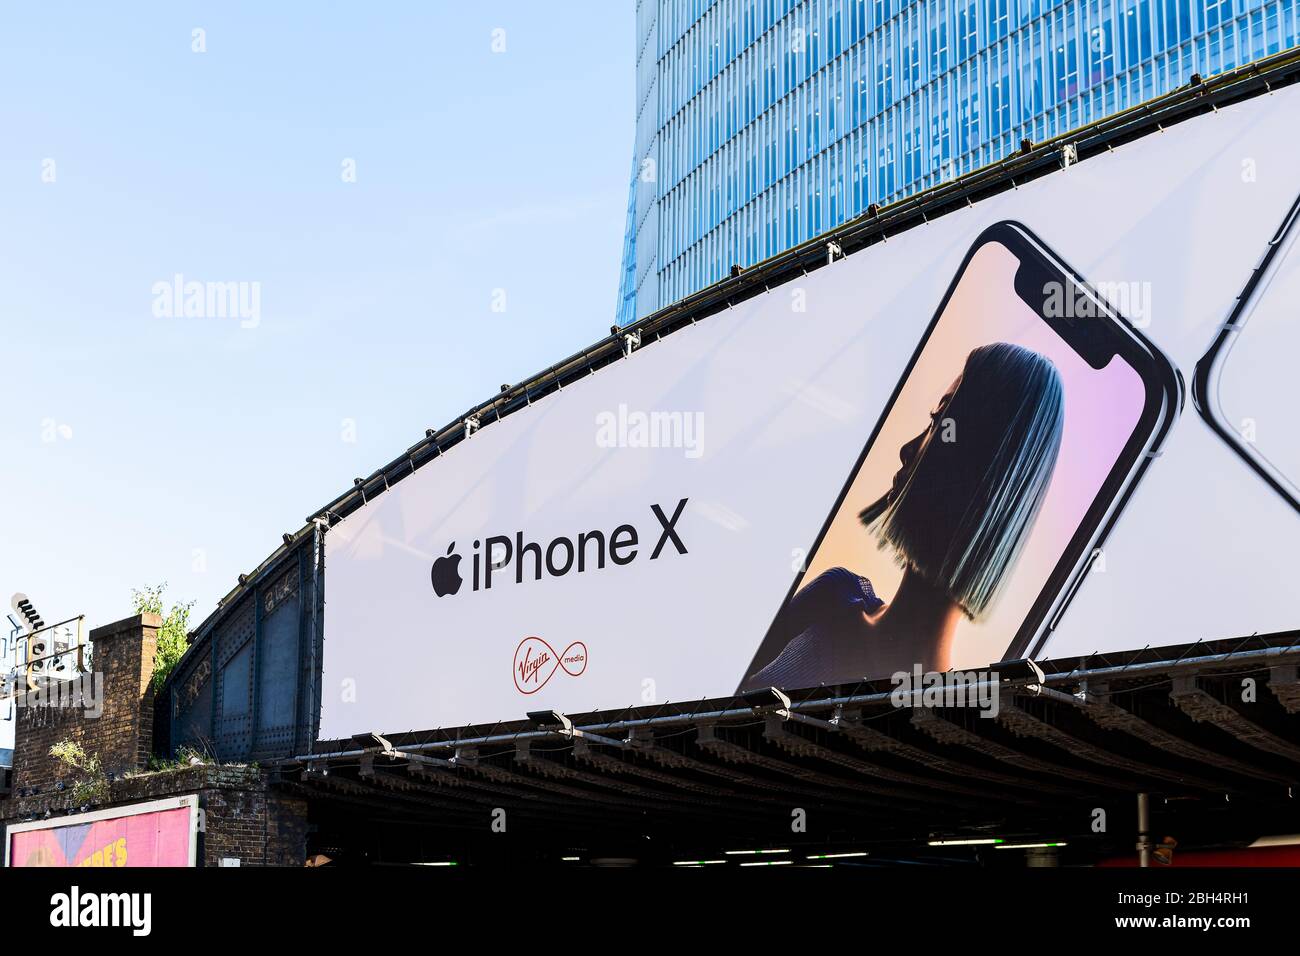 London, UK - June 22, 2018: Advertisement Billboard sign for iPhone X and Virgin Media and background of modern skyscraper building Stock Photo